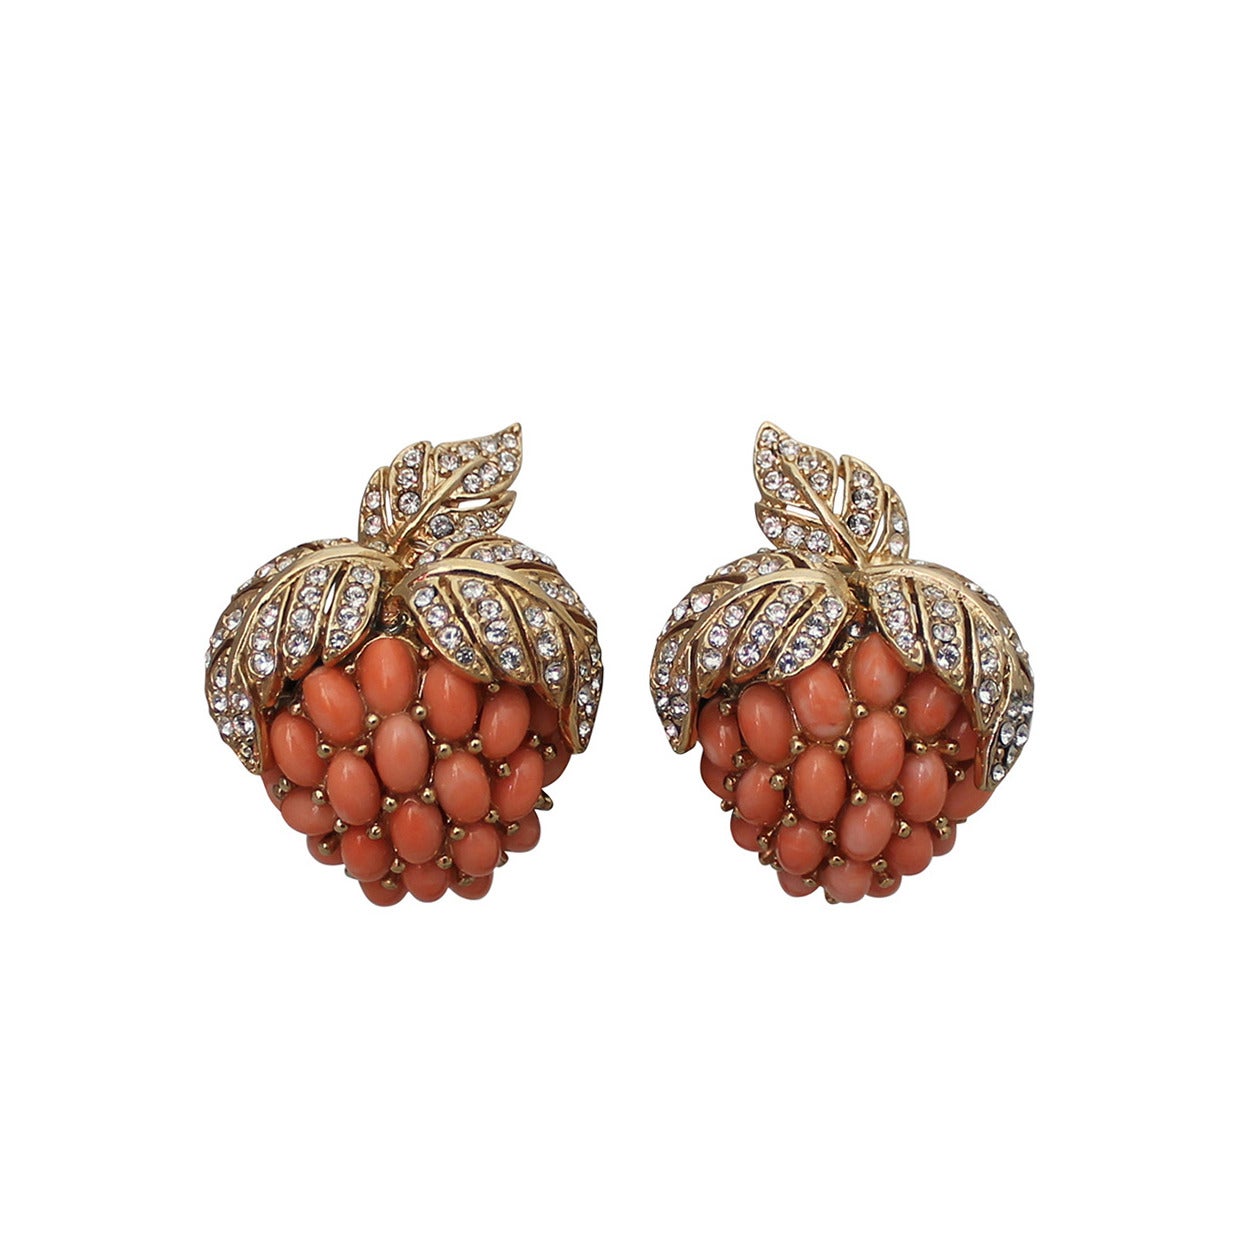 1990s Ciner Strawberry Shaped Earrings with Coral Colored Stones and Rhinestones